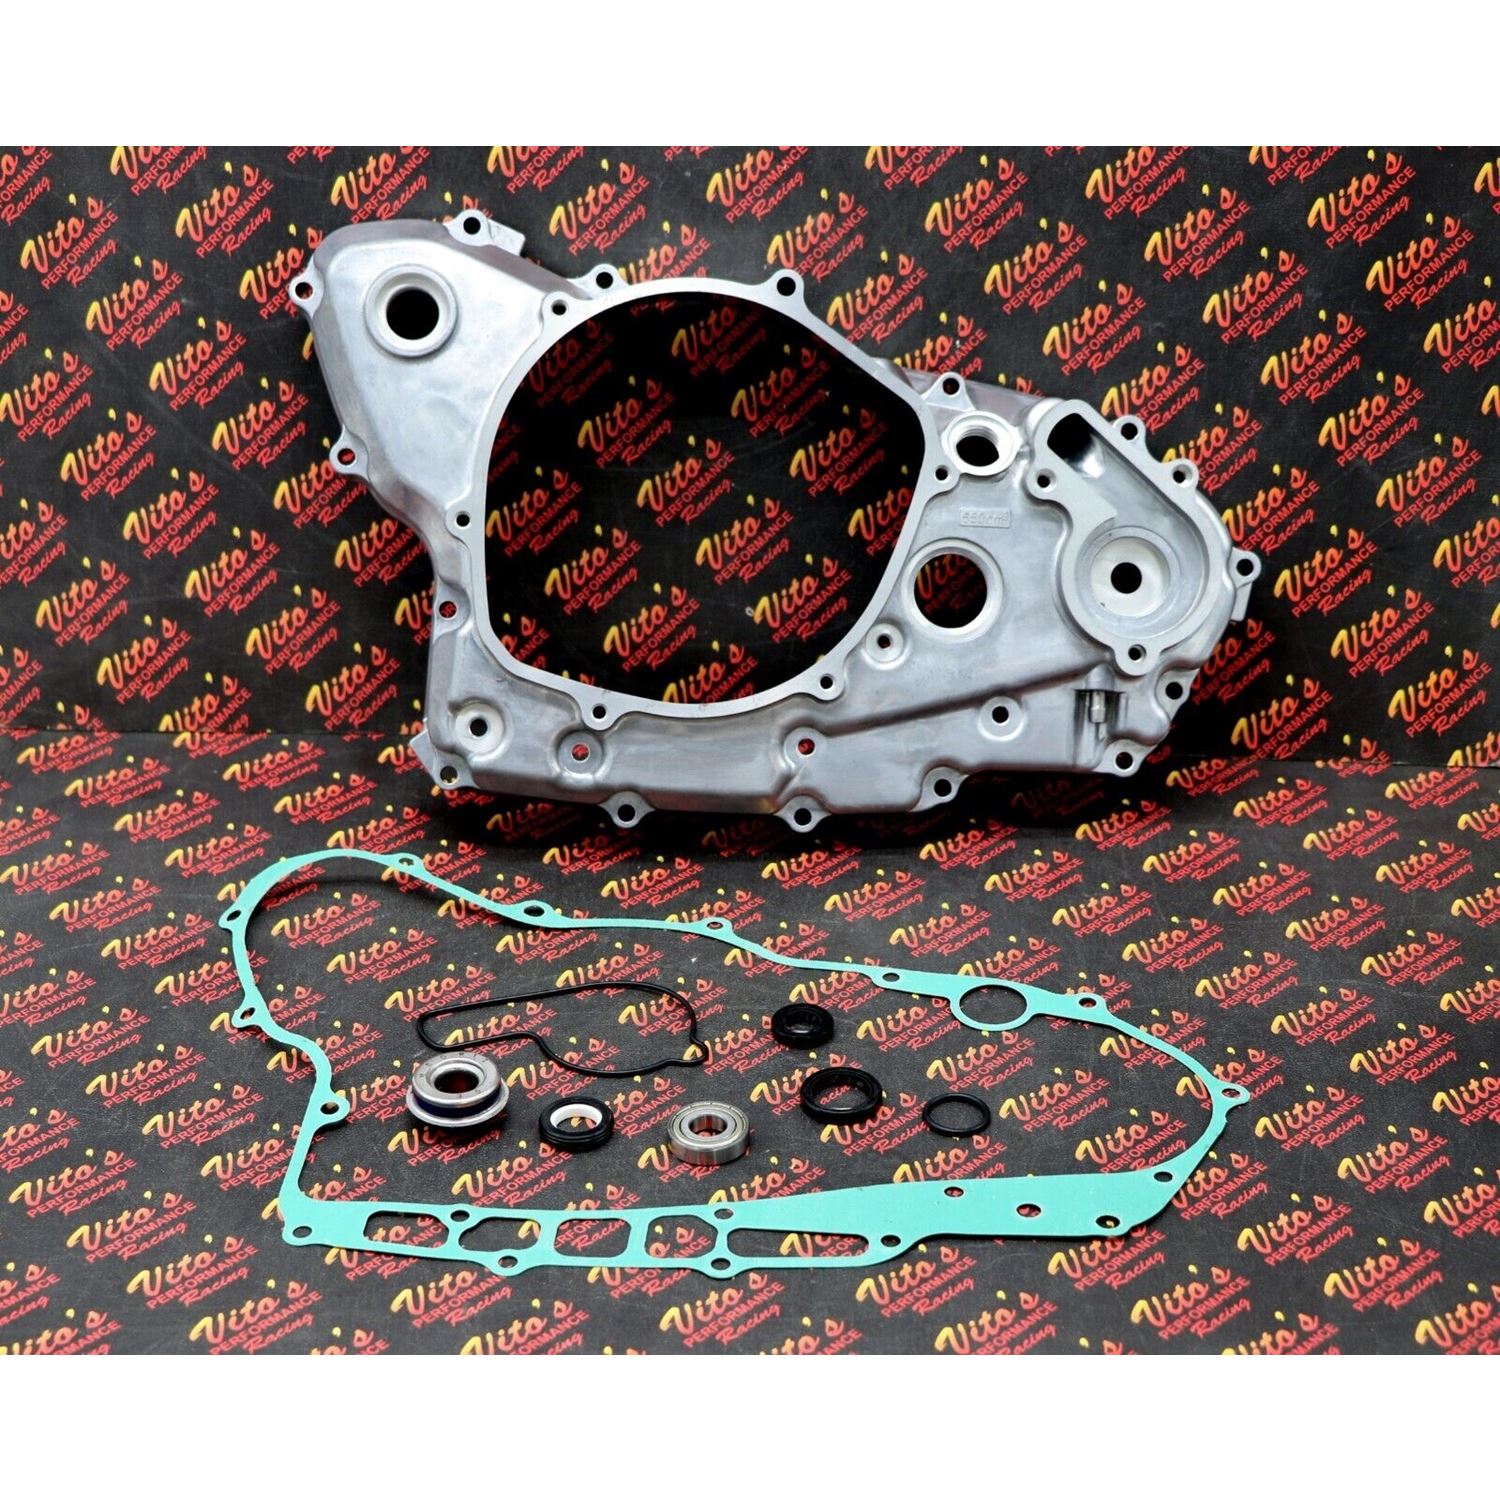 NEW Crankcase clutch right side cover 2004 2005 Ho